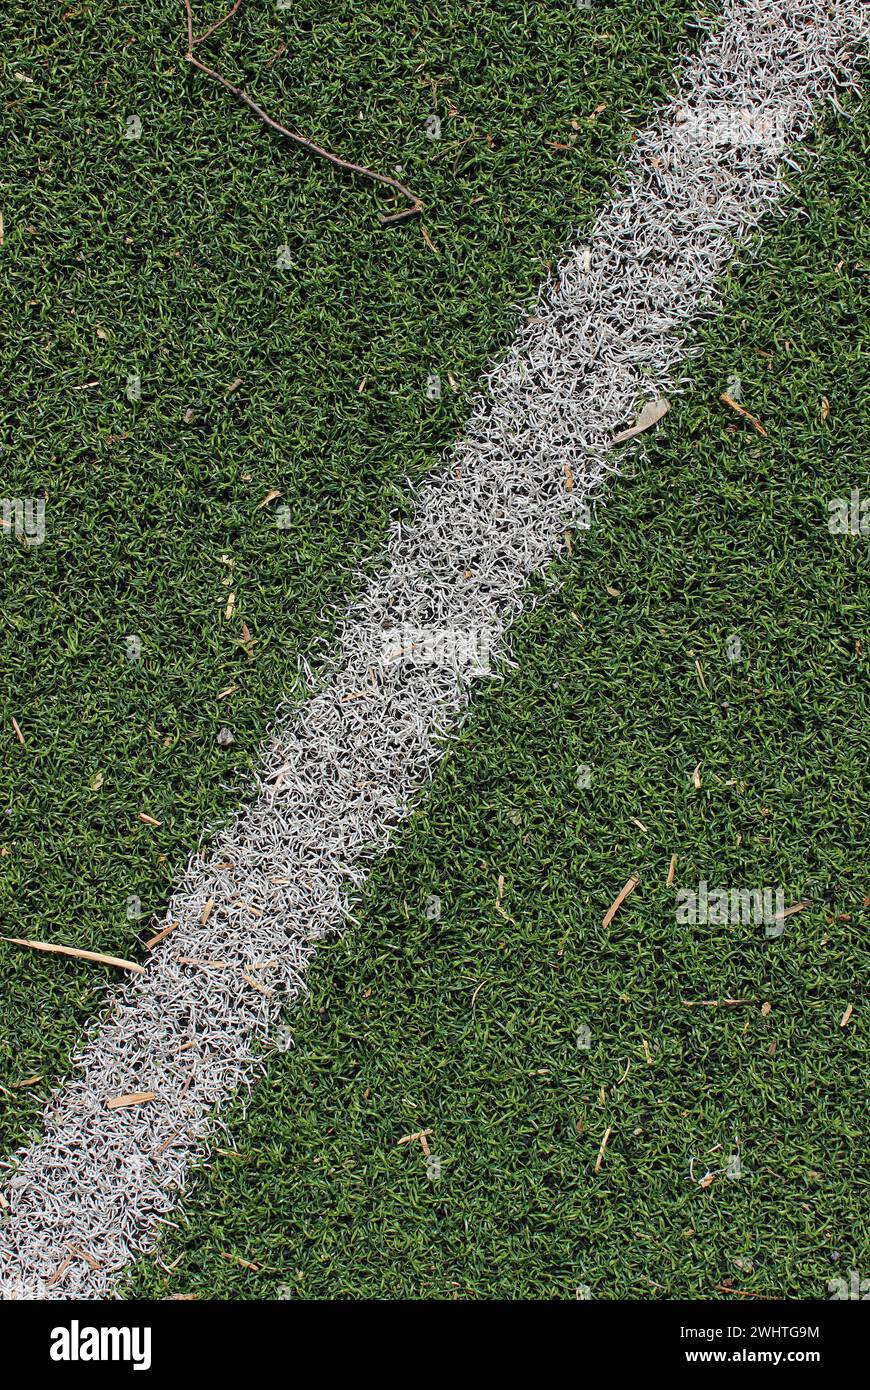 Green artificial lawn with a white painted dividing line texture background Stock Photo